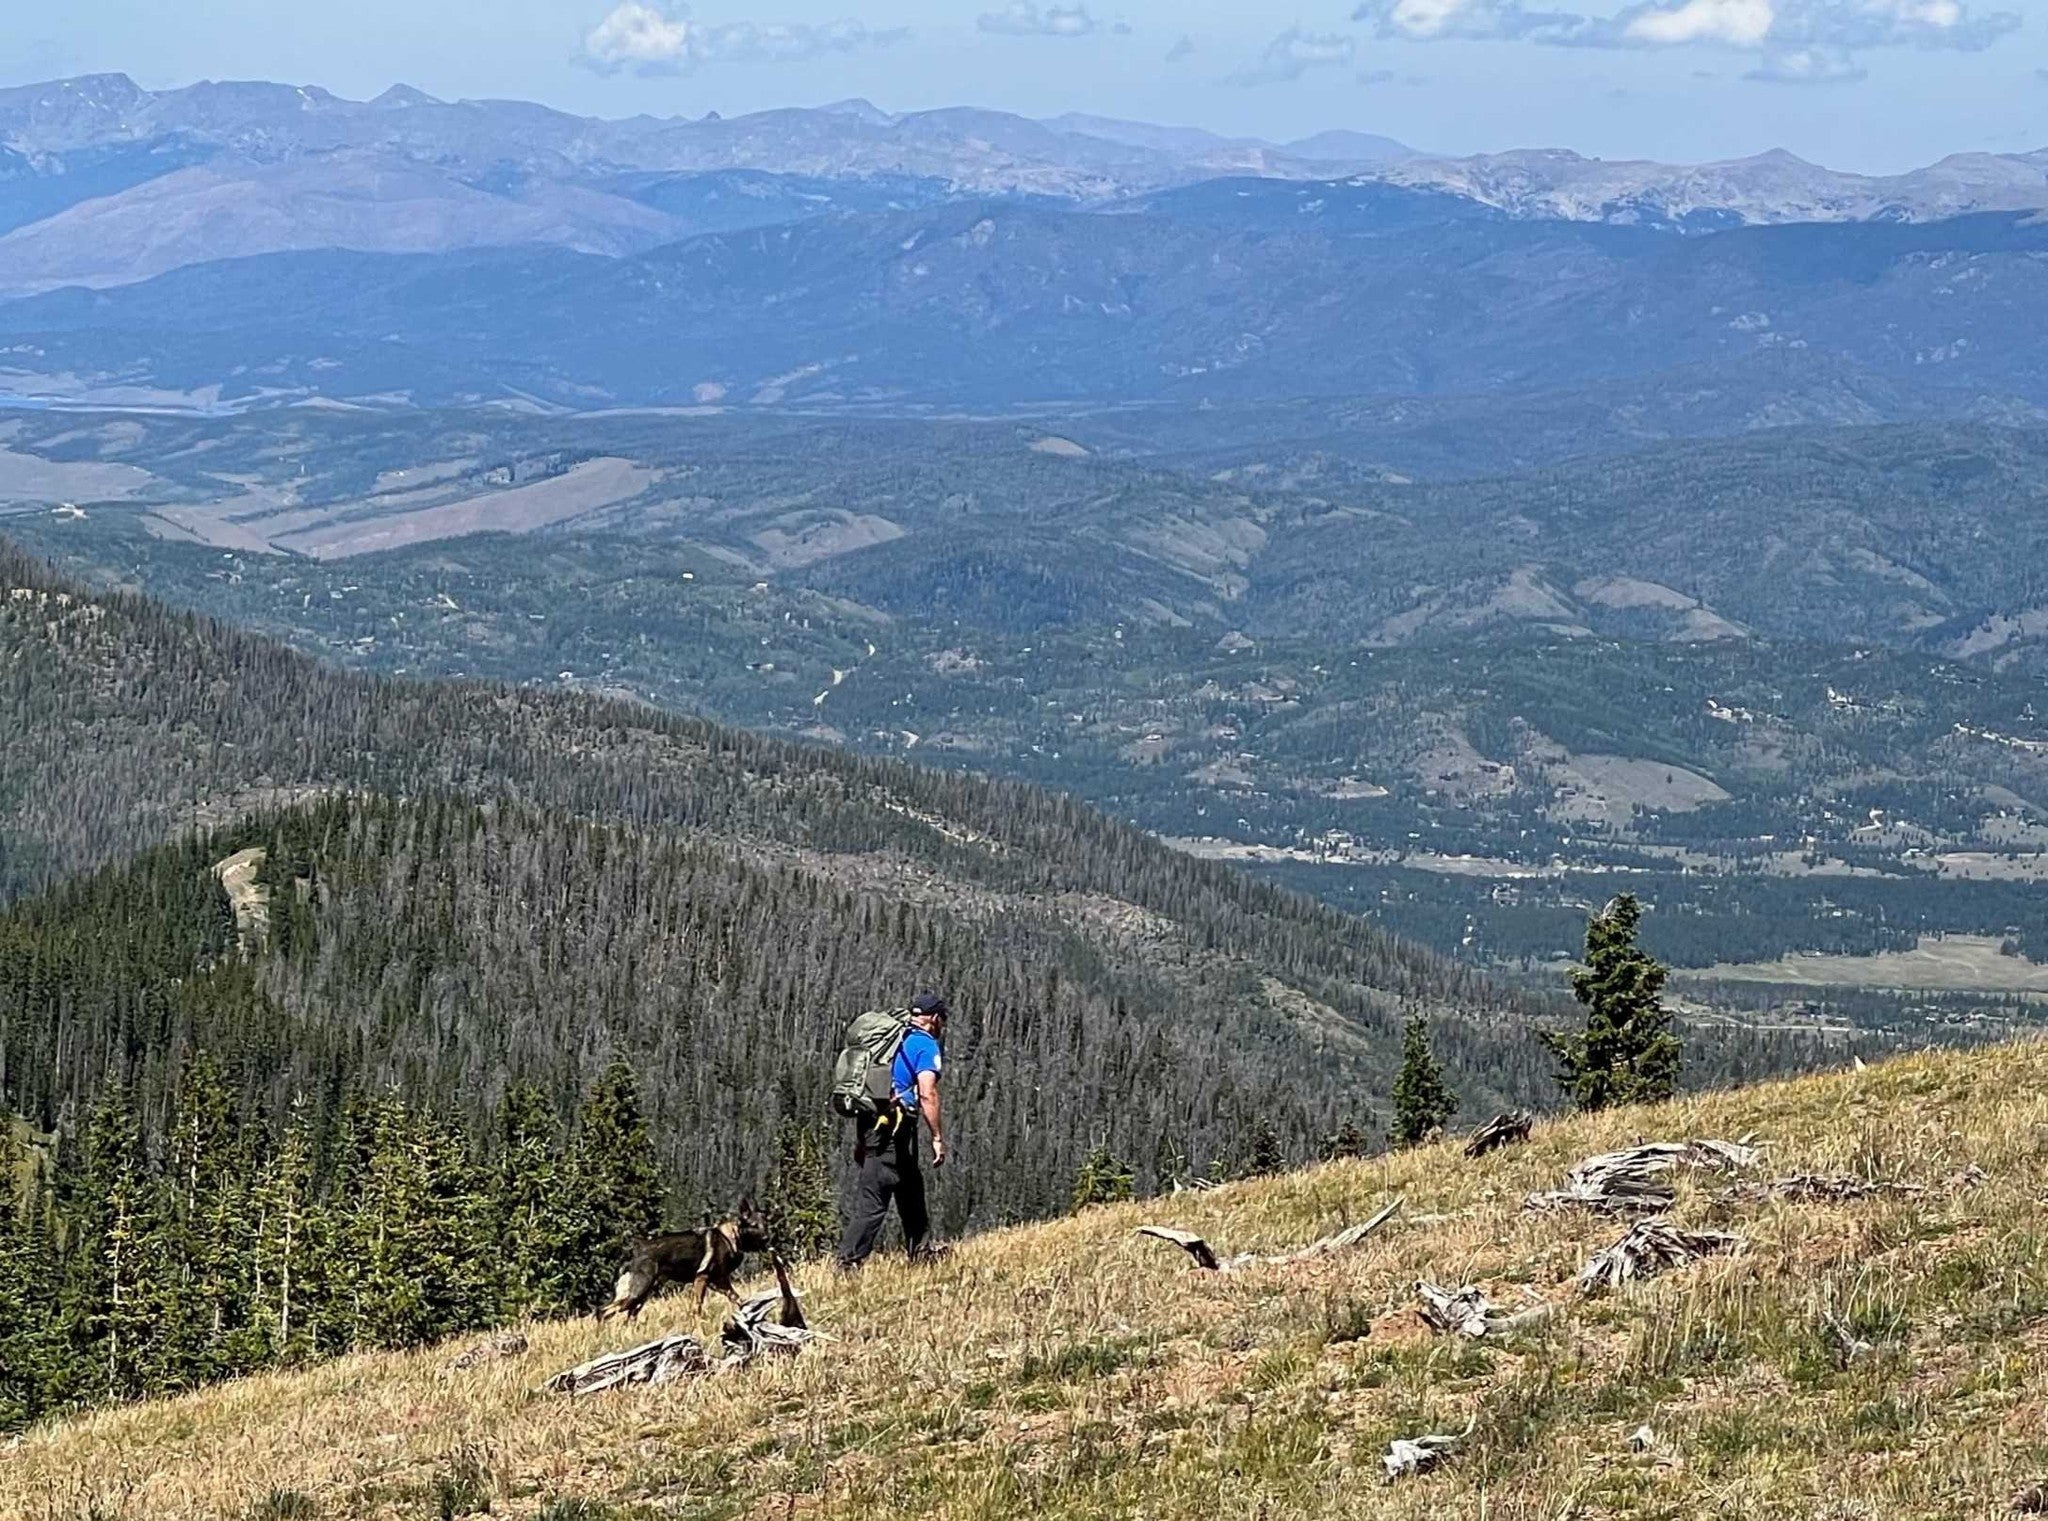 Search teams are scouring the vast wilderness in Colorado for two missing women